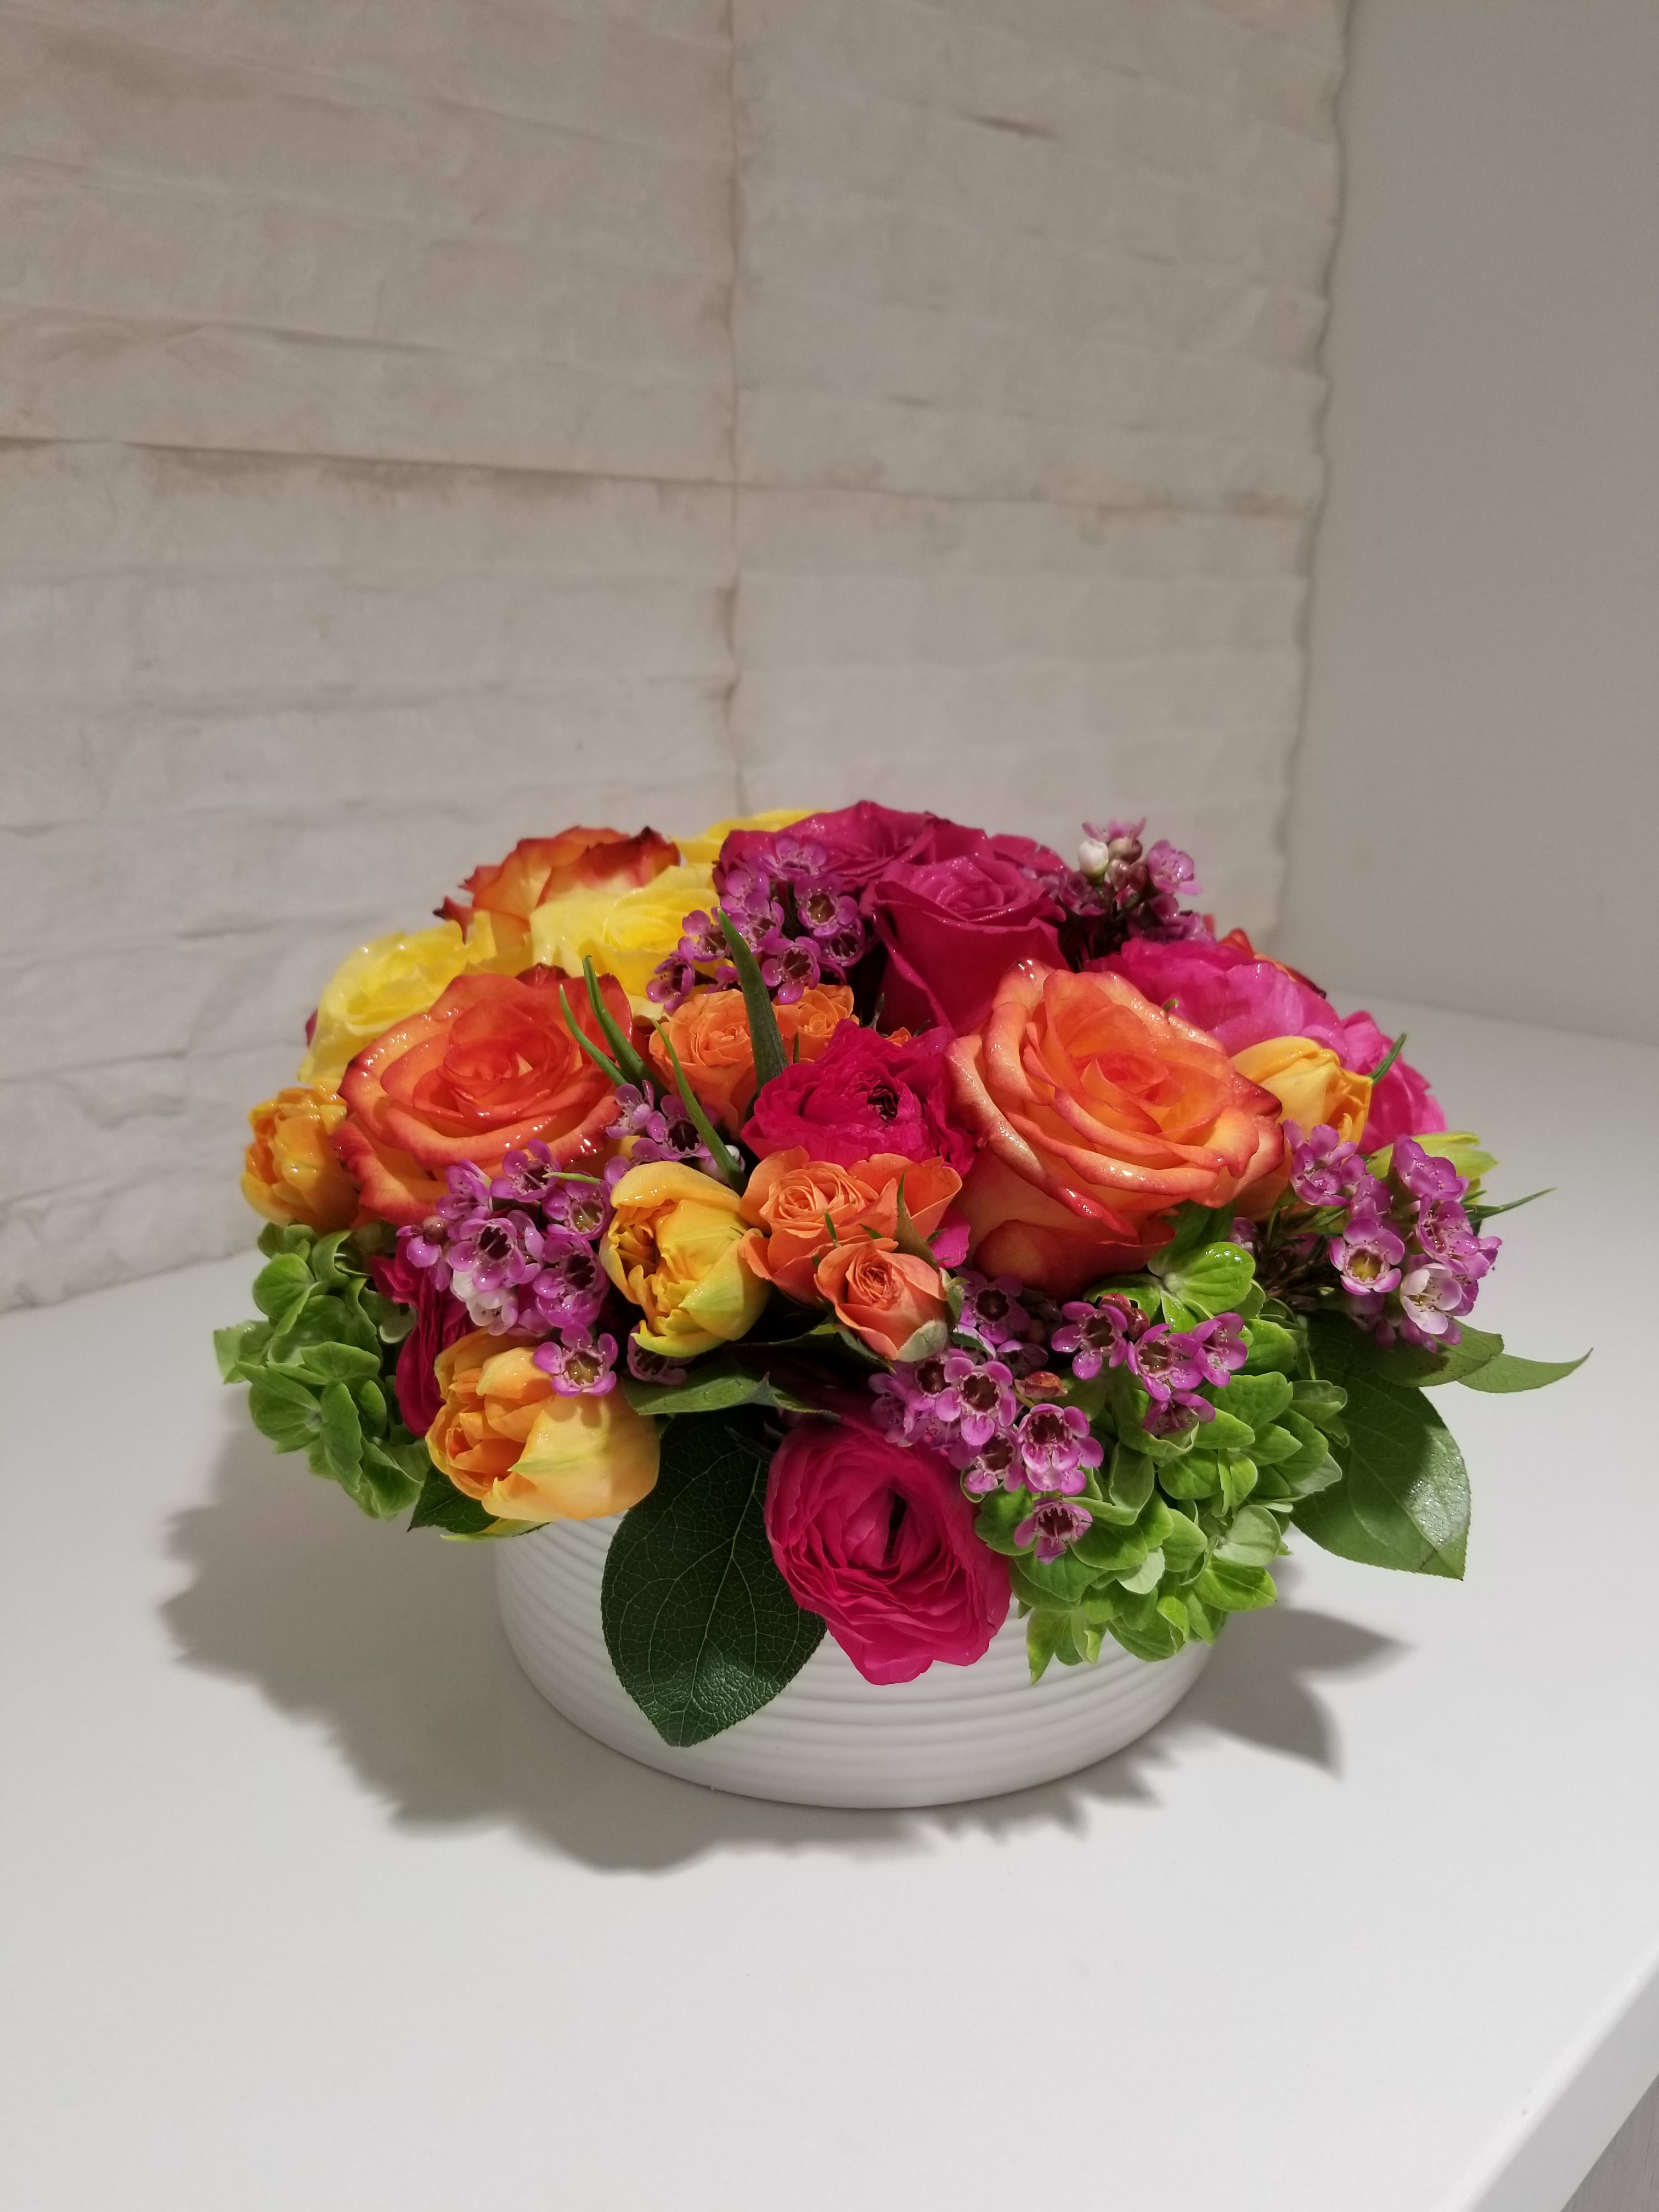 Whimsical Dreams - A low compact garden arrangement with assorted blooms. Perfect for any occasion.